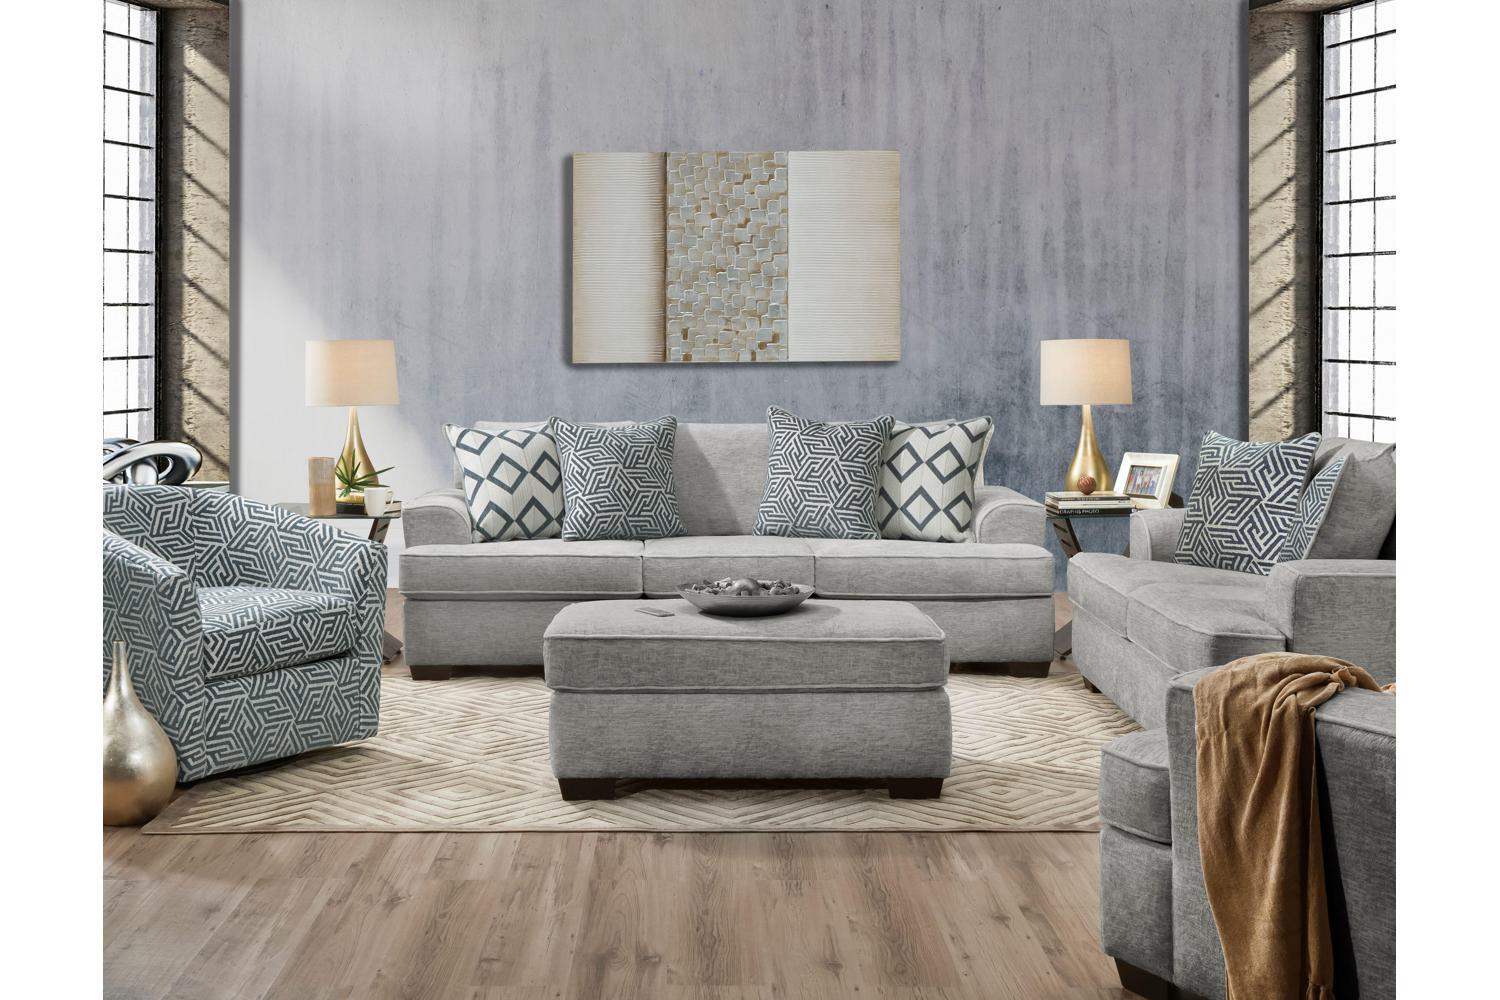 Large Gray Sofa with Accent Pillows